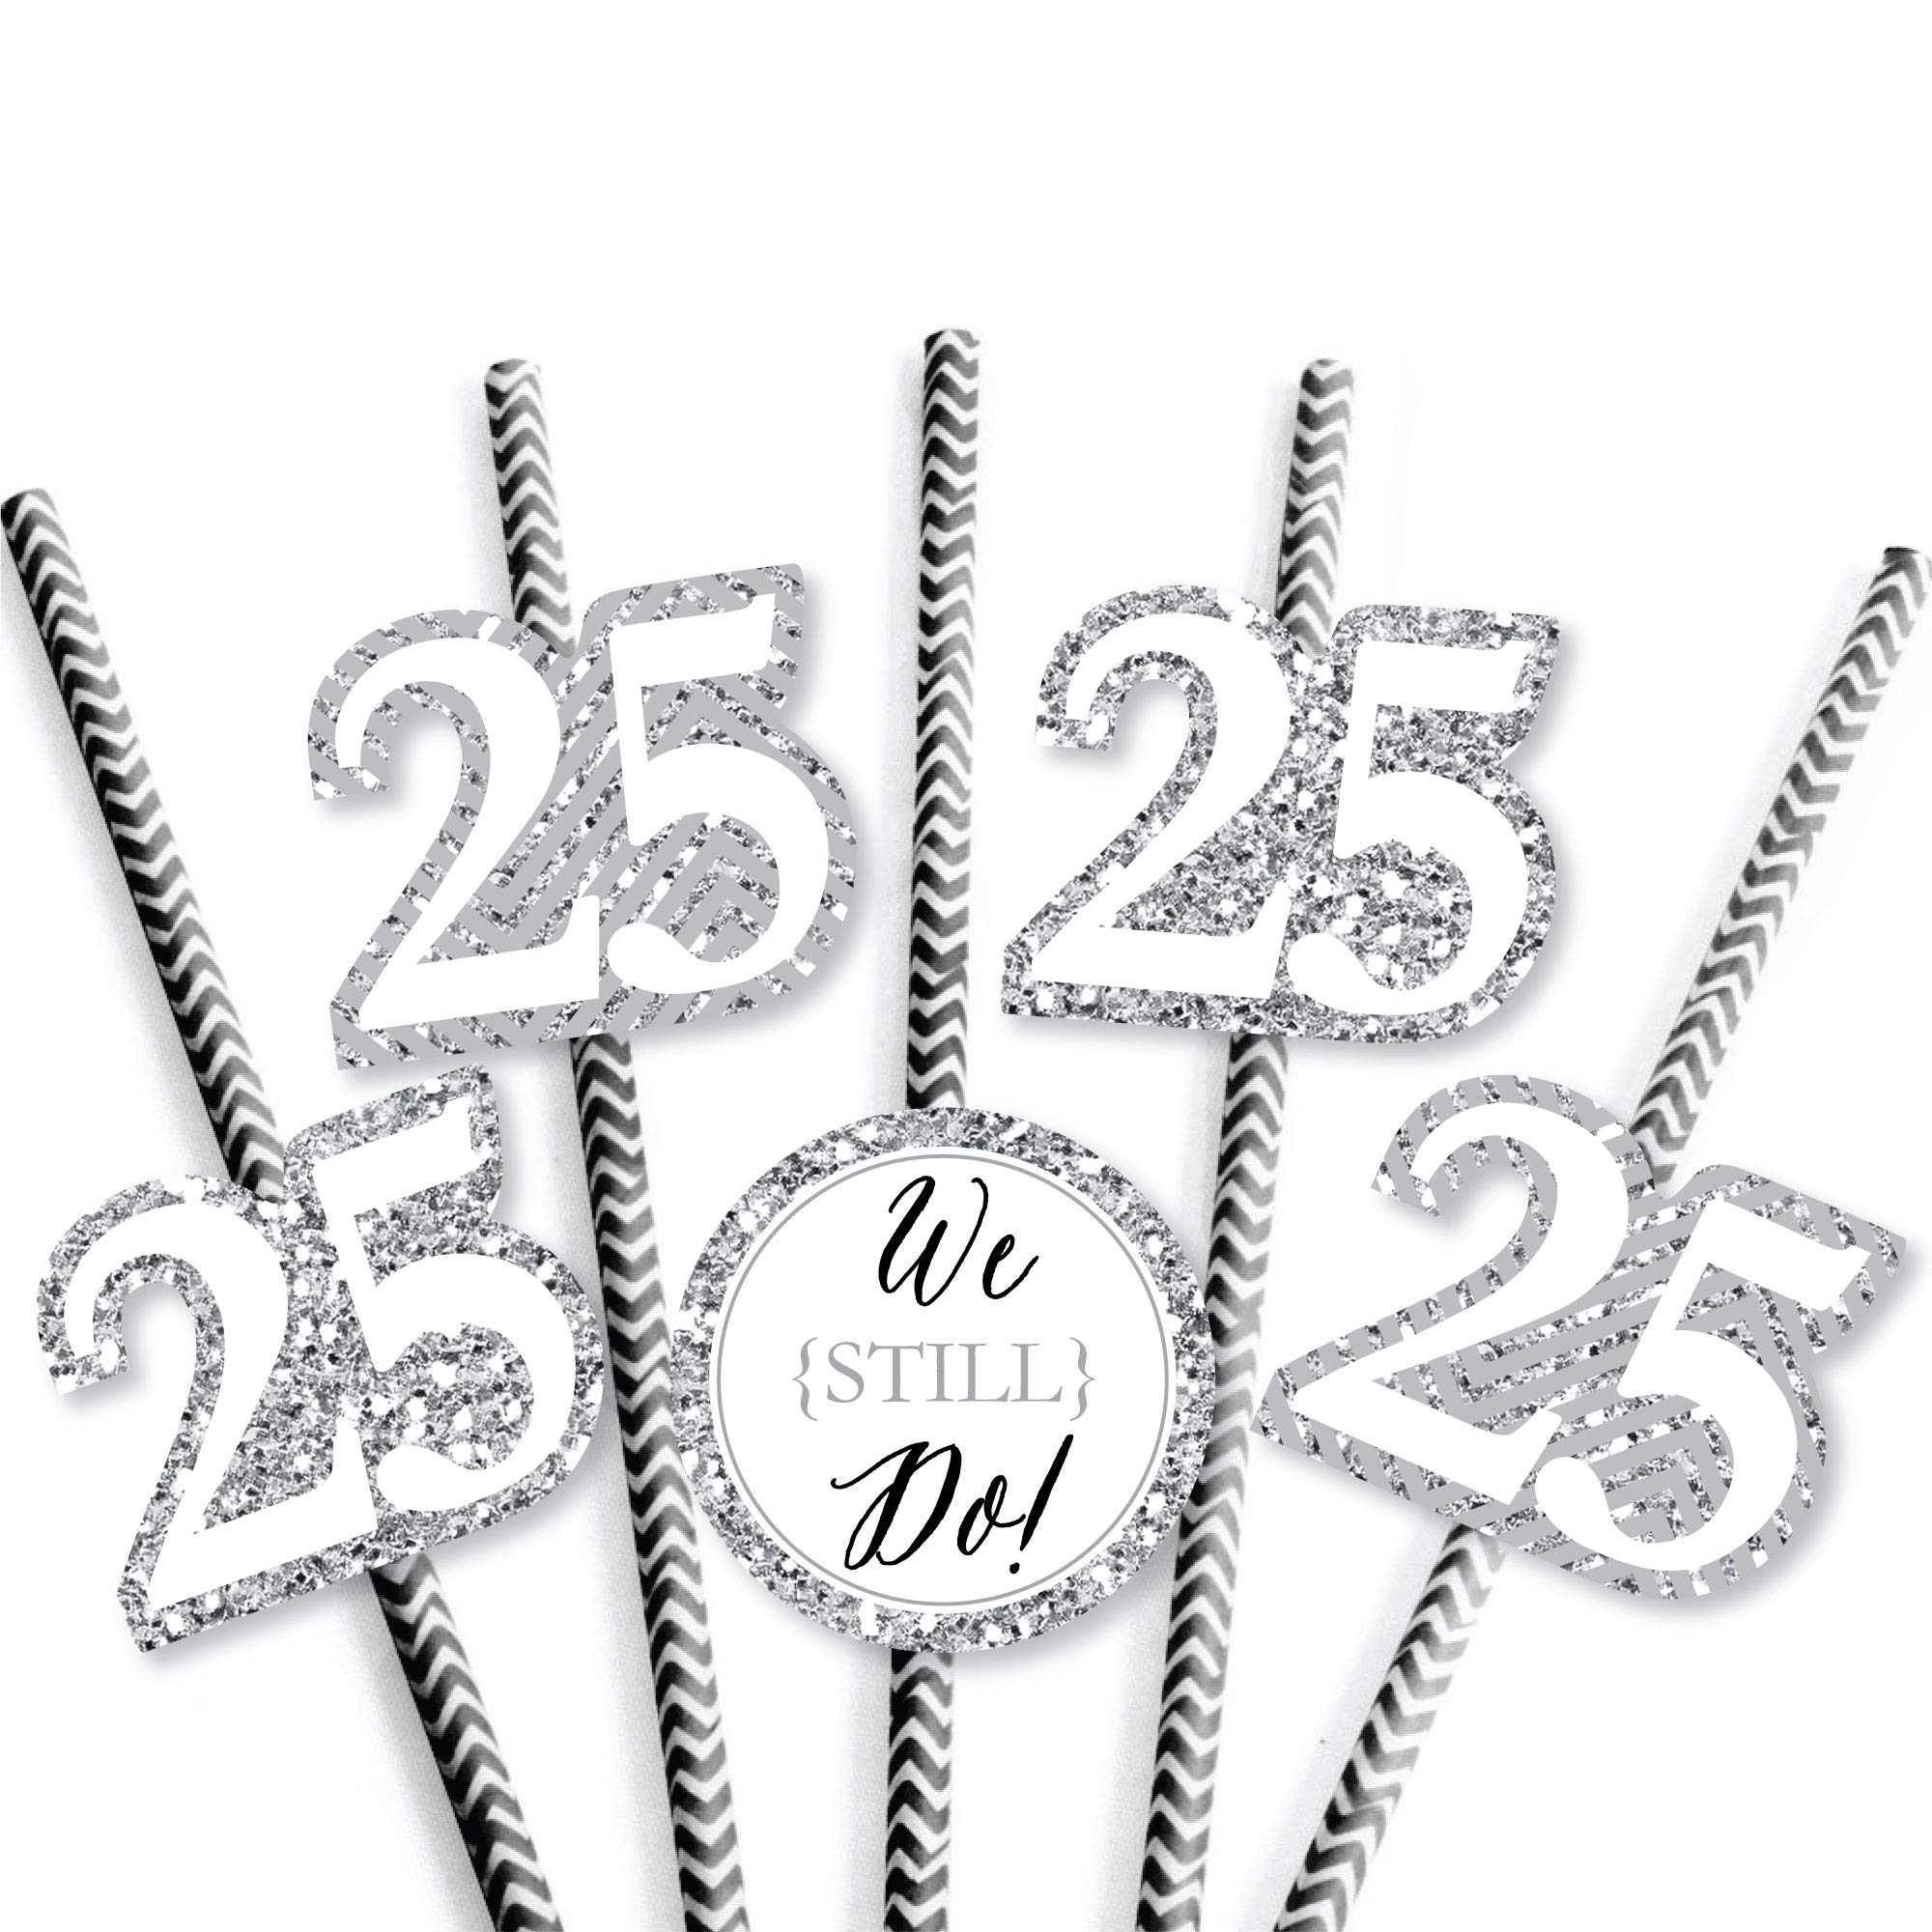 Big Dot of Happiness We Still Do Paper Straw Decor - 25th Wedding Anniversary Party Striped Decorative Straws - Set of 24